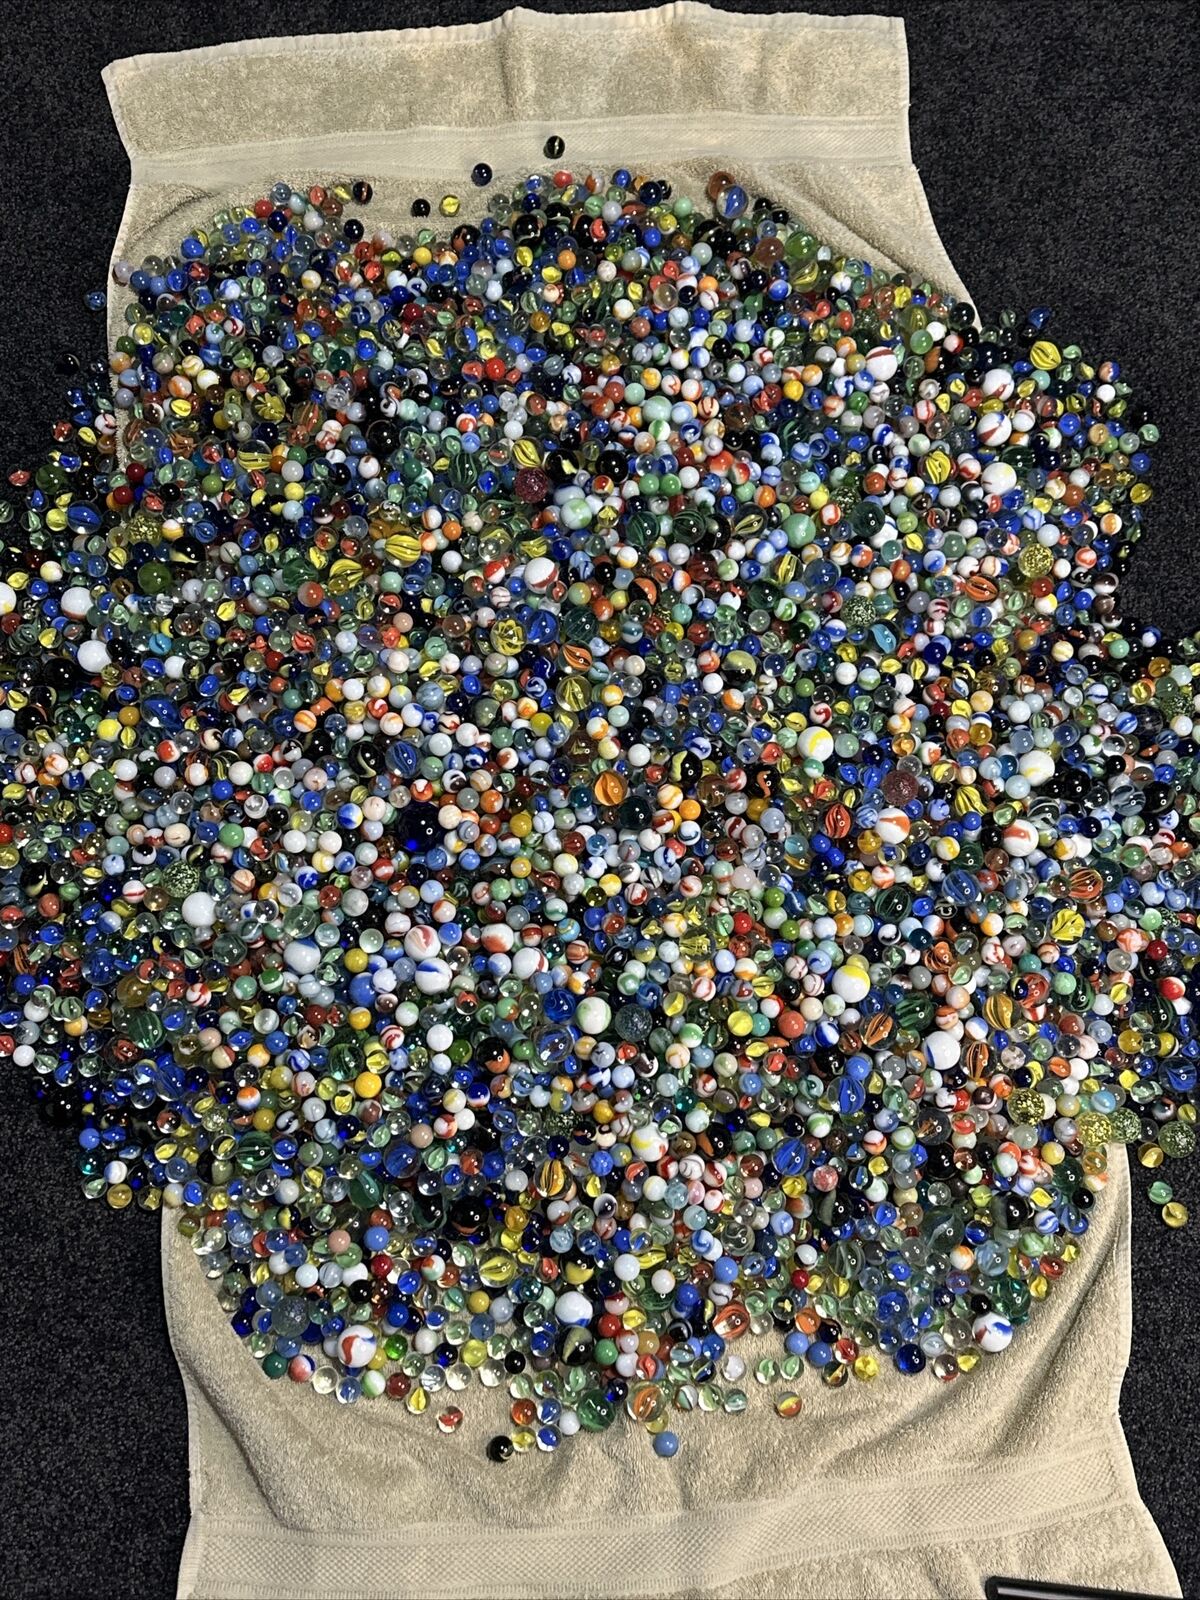 1LB Bag Of Marbles Weighed From This Super Huge Pile Ton Of Variety/Sizes/Style